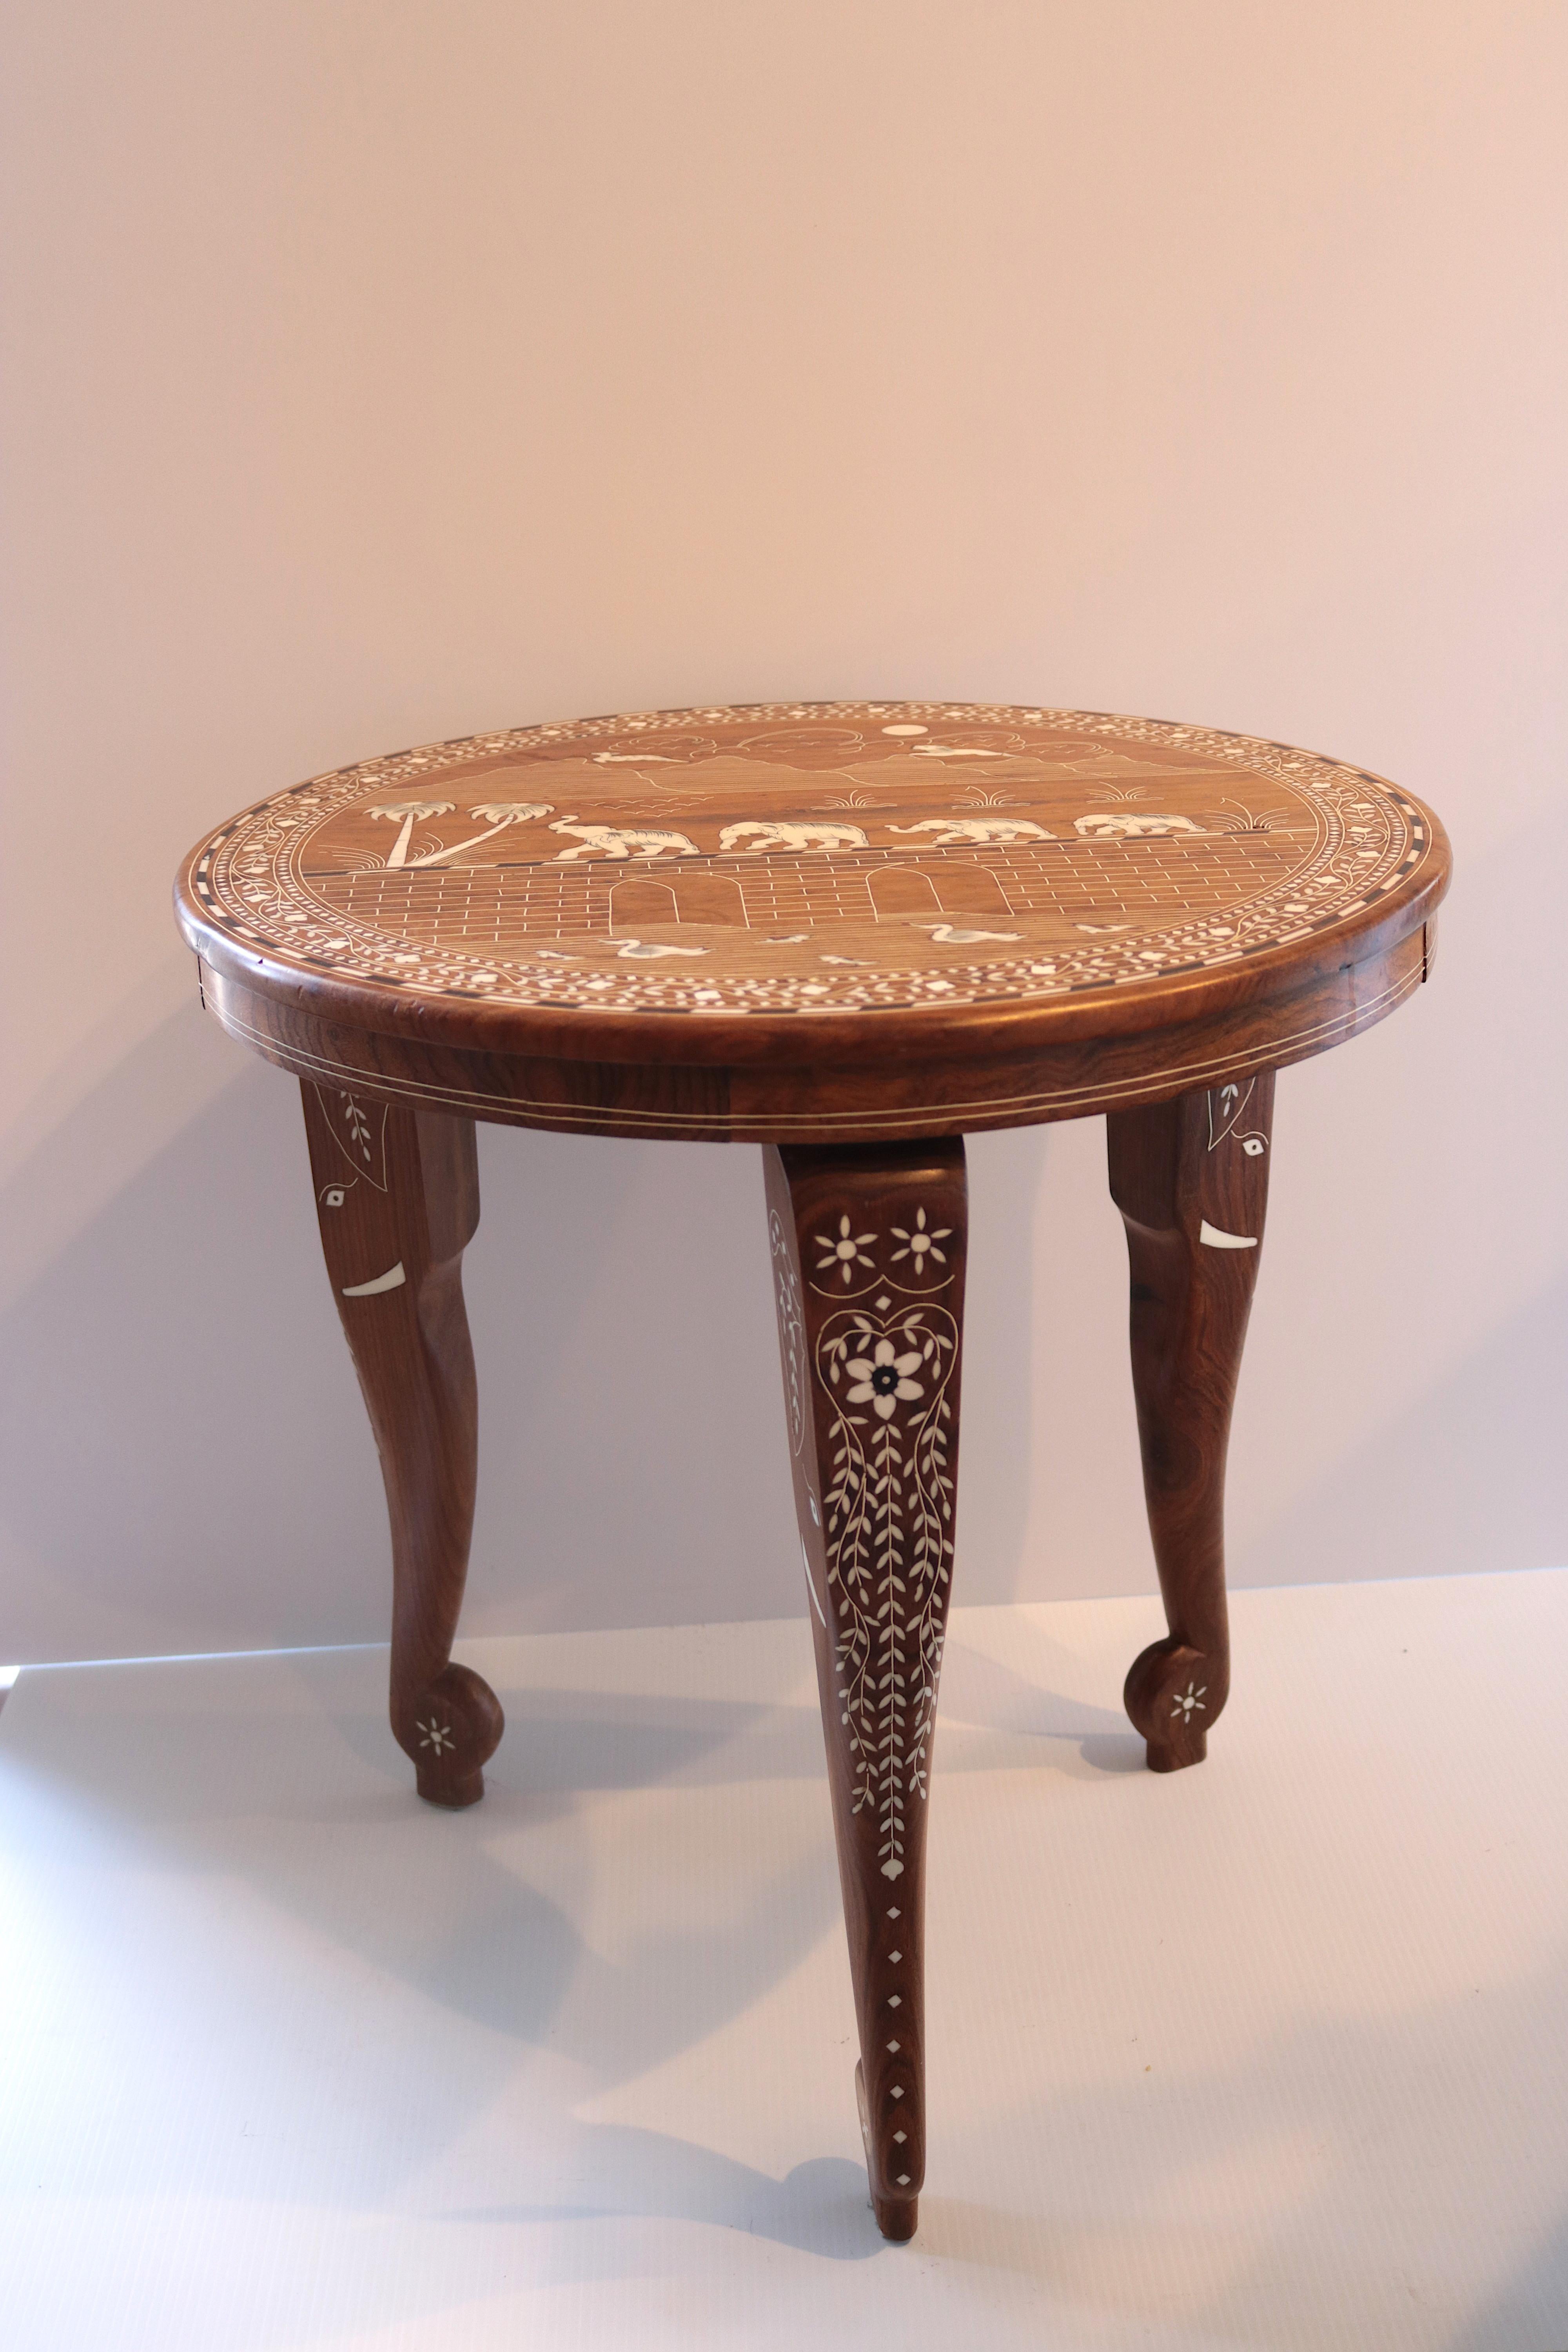 Anglo Indian Rosewood Side Tables Elephant Legs-Peacock and Elephant Inlay 5